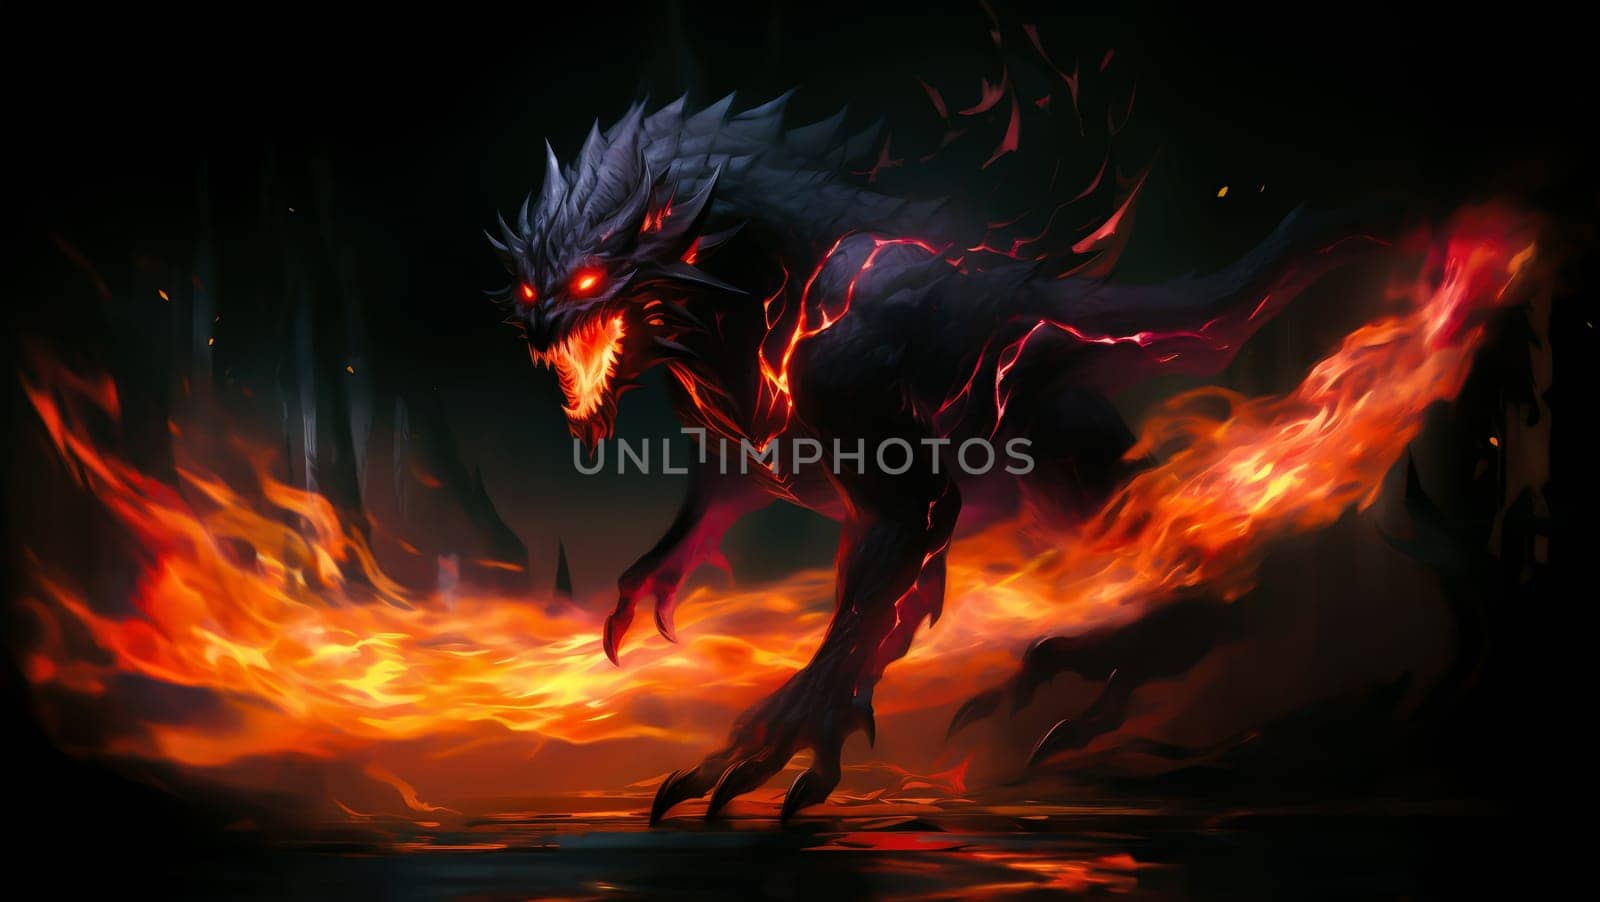 Fiery demon. Mystical monster in fire on dark background. A horrible creature from a nightmare.